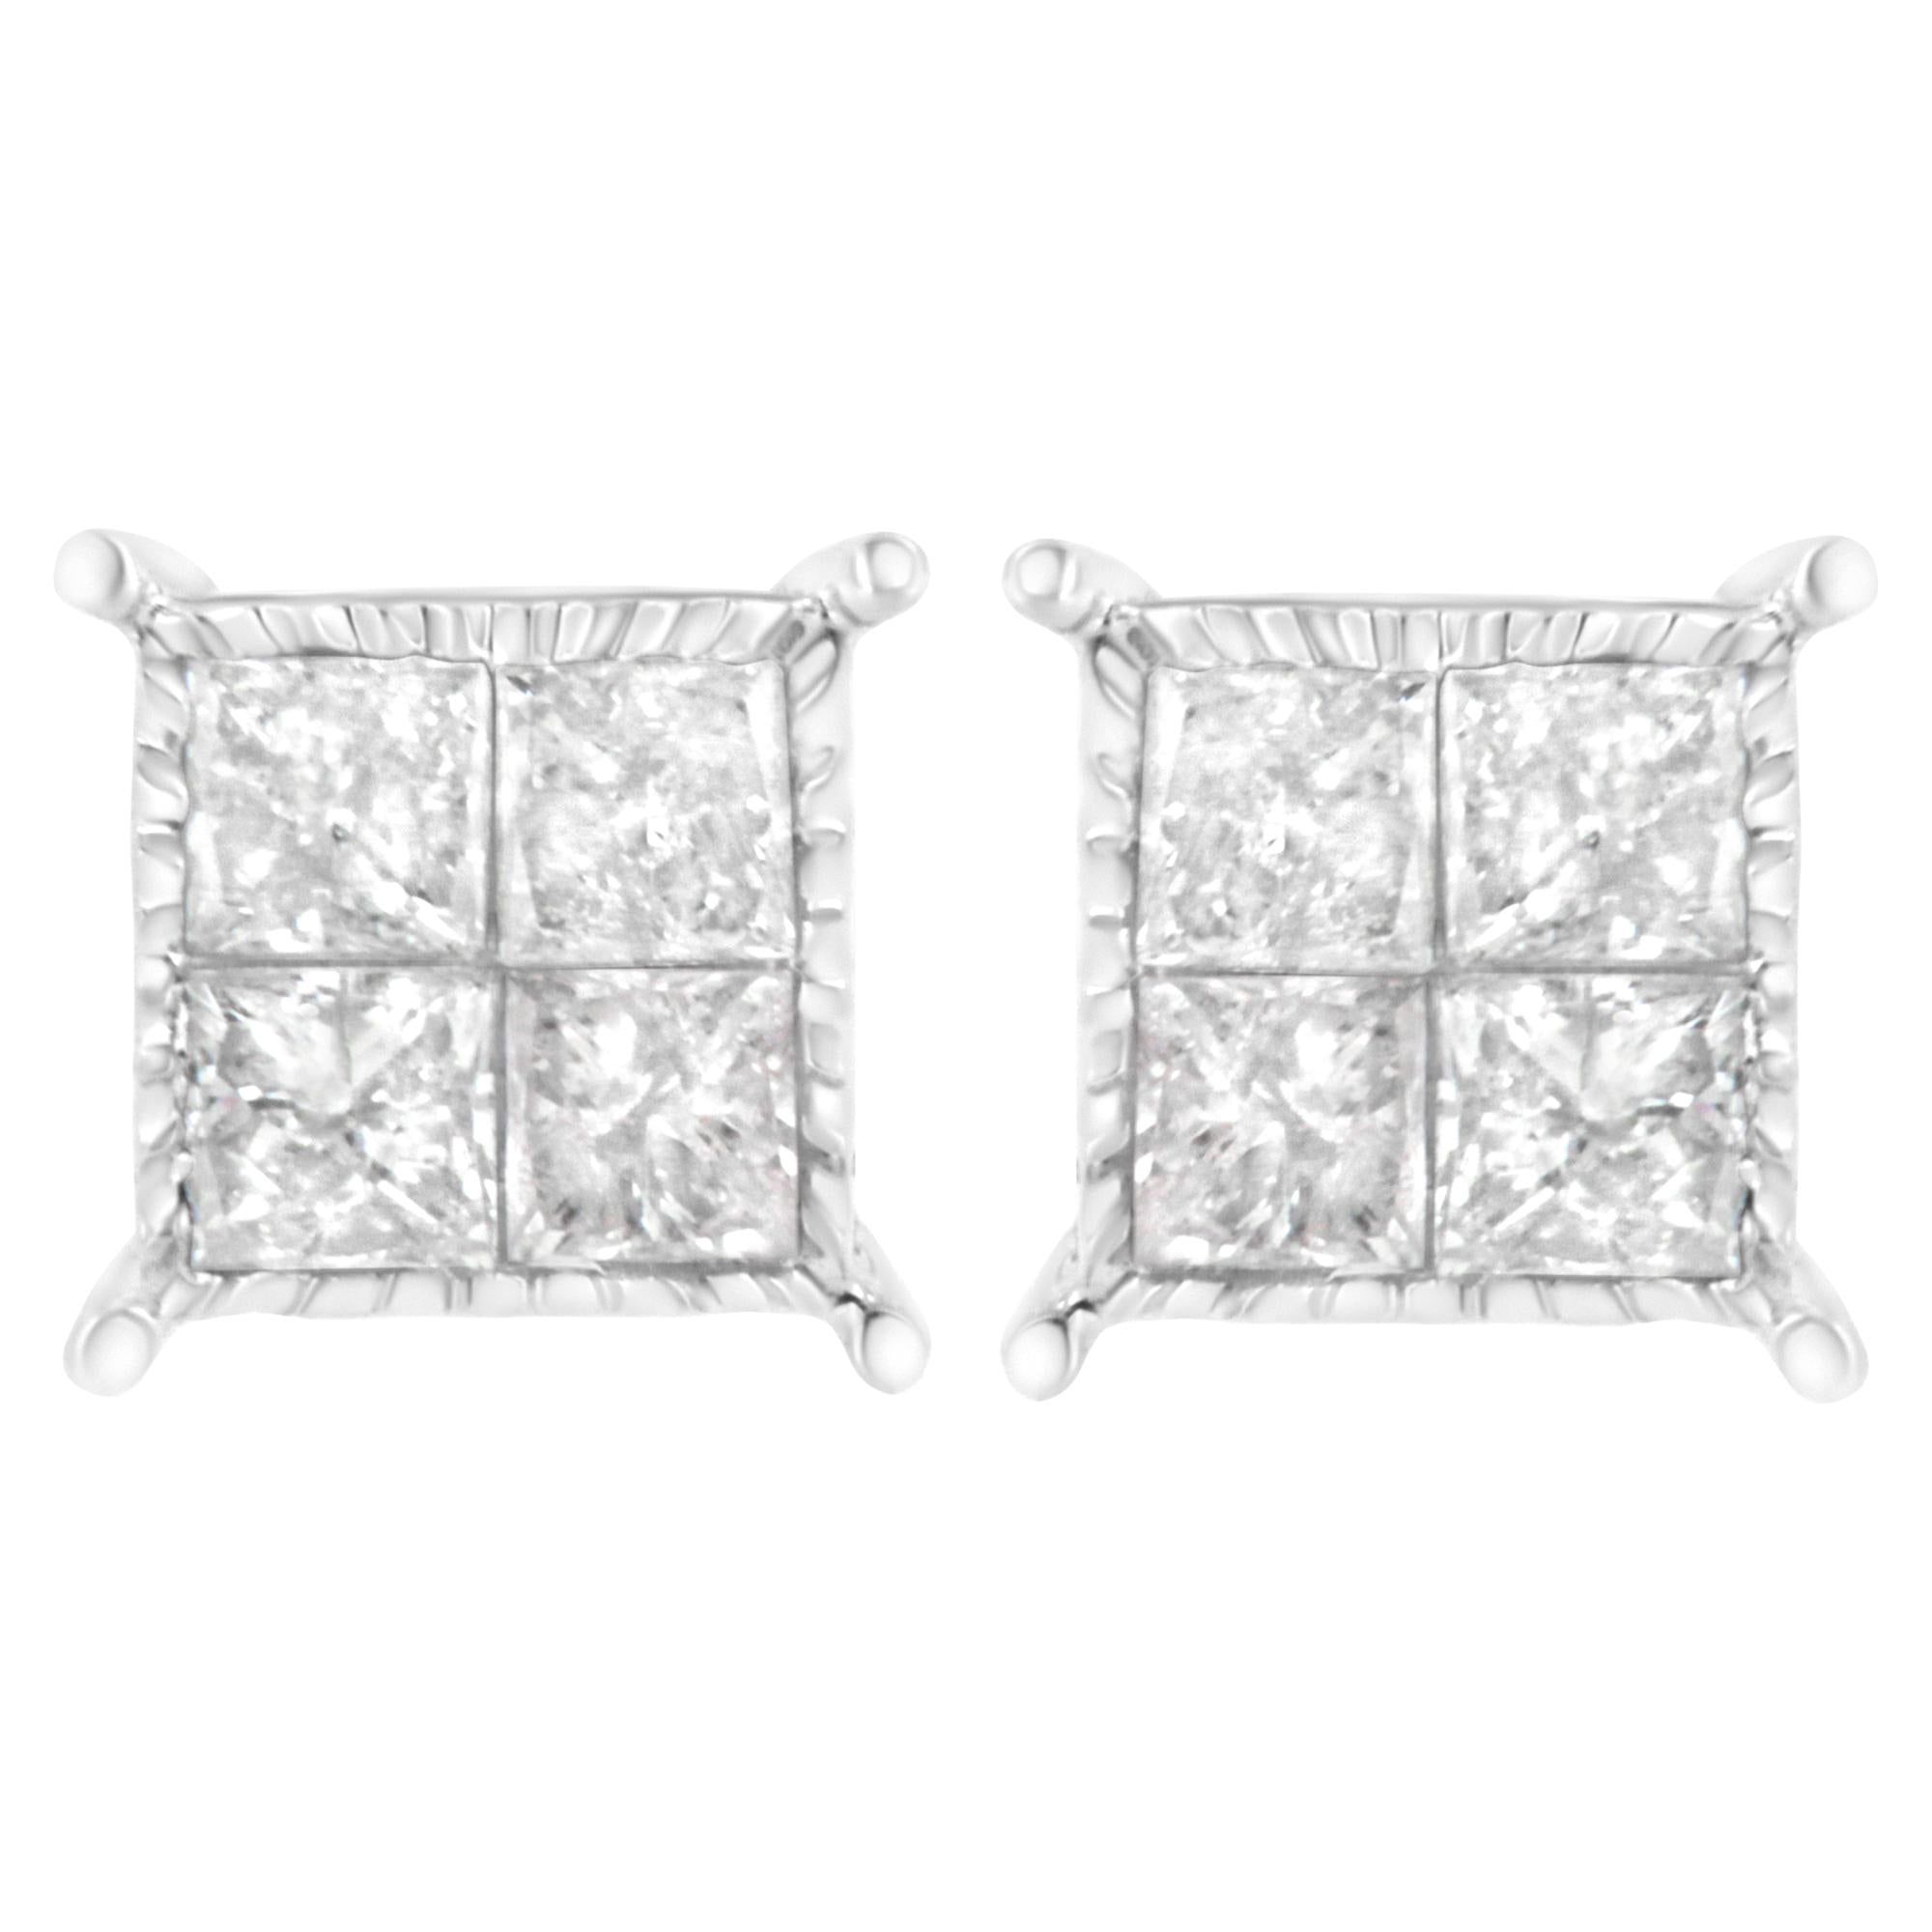 ''10K White Gold Square Earrings with Princess Cut Diamond (3/4 cttw, I-J Color, I2-I3 Clarity)''